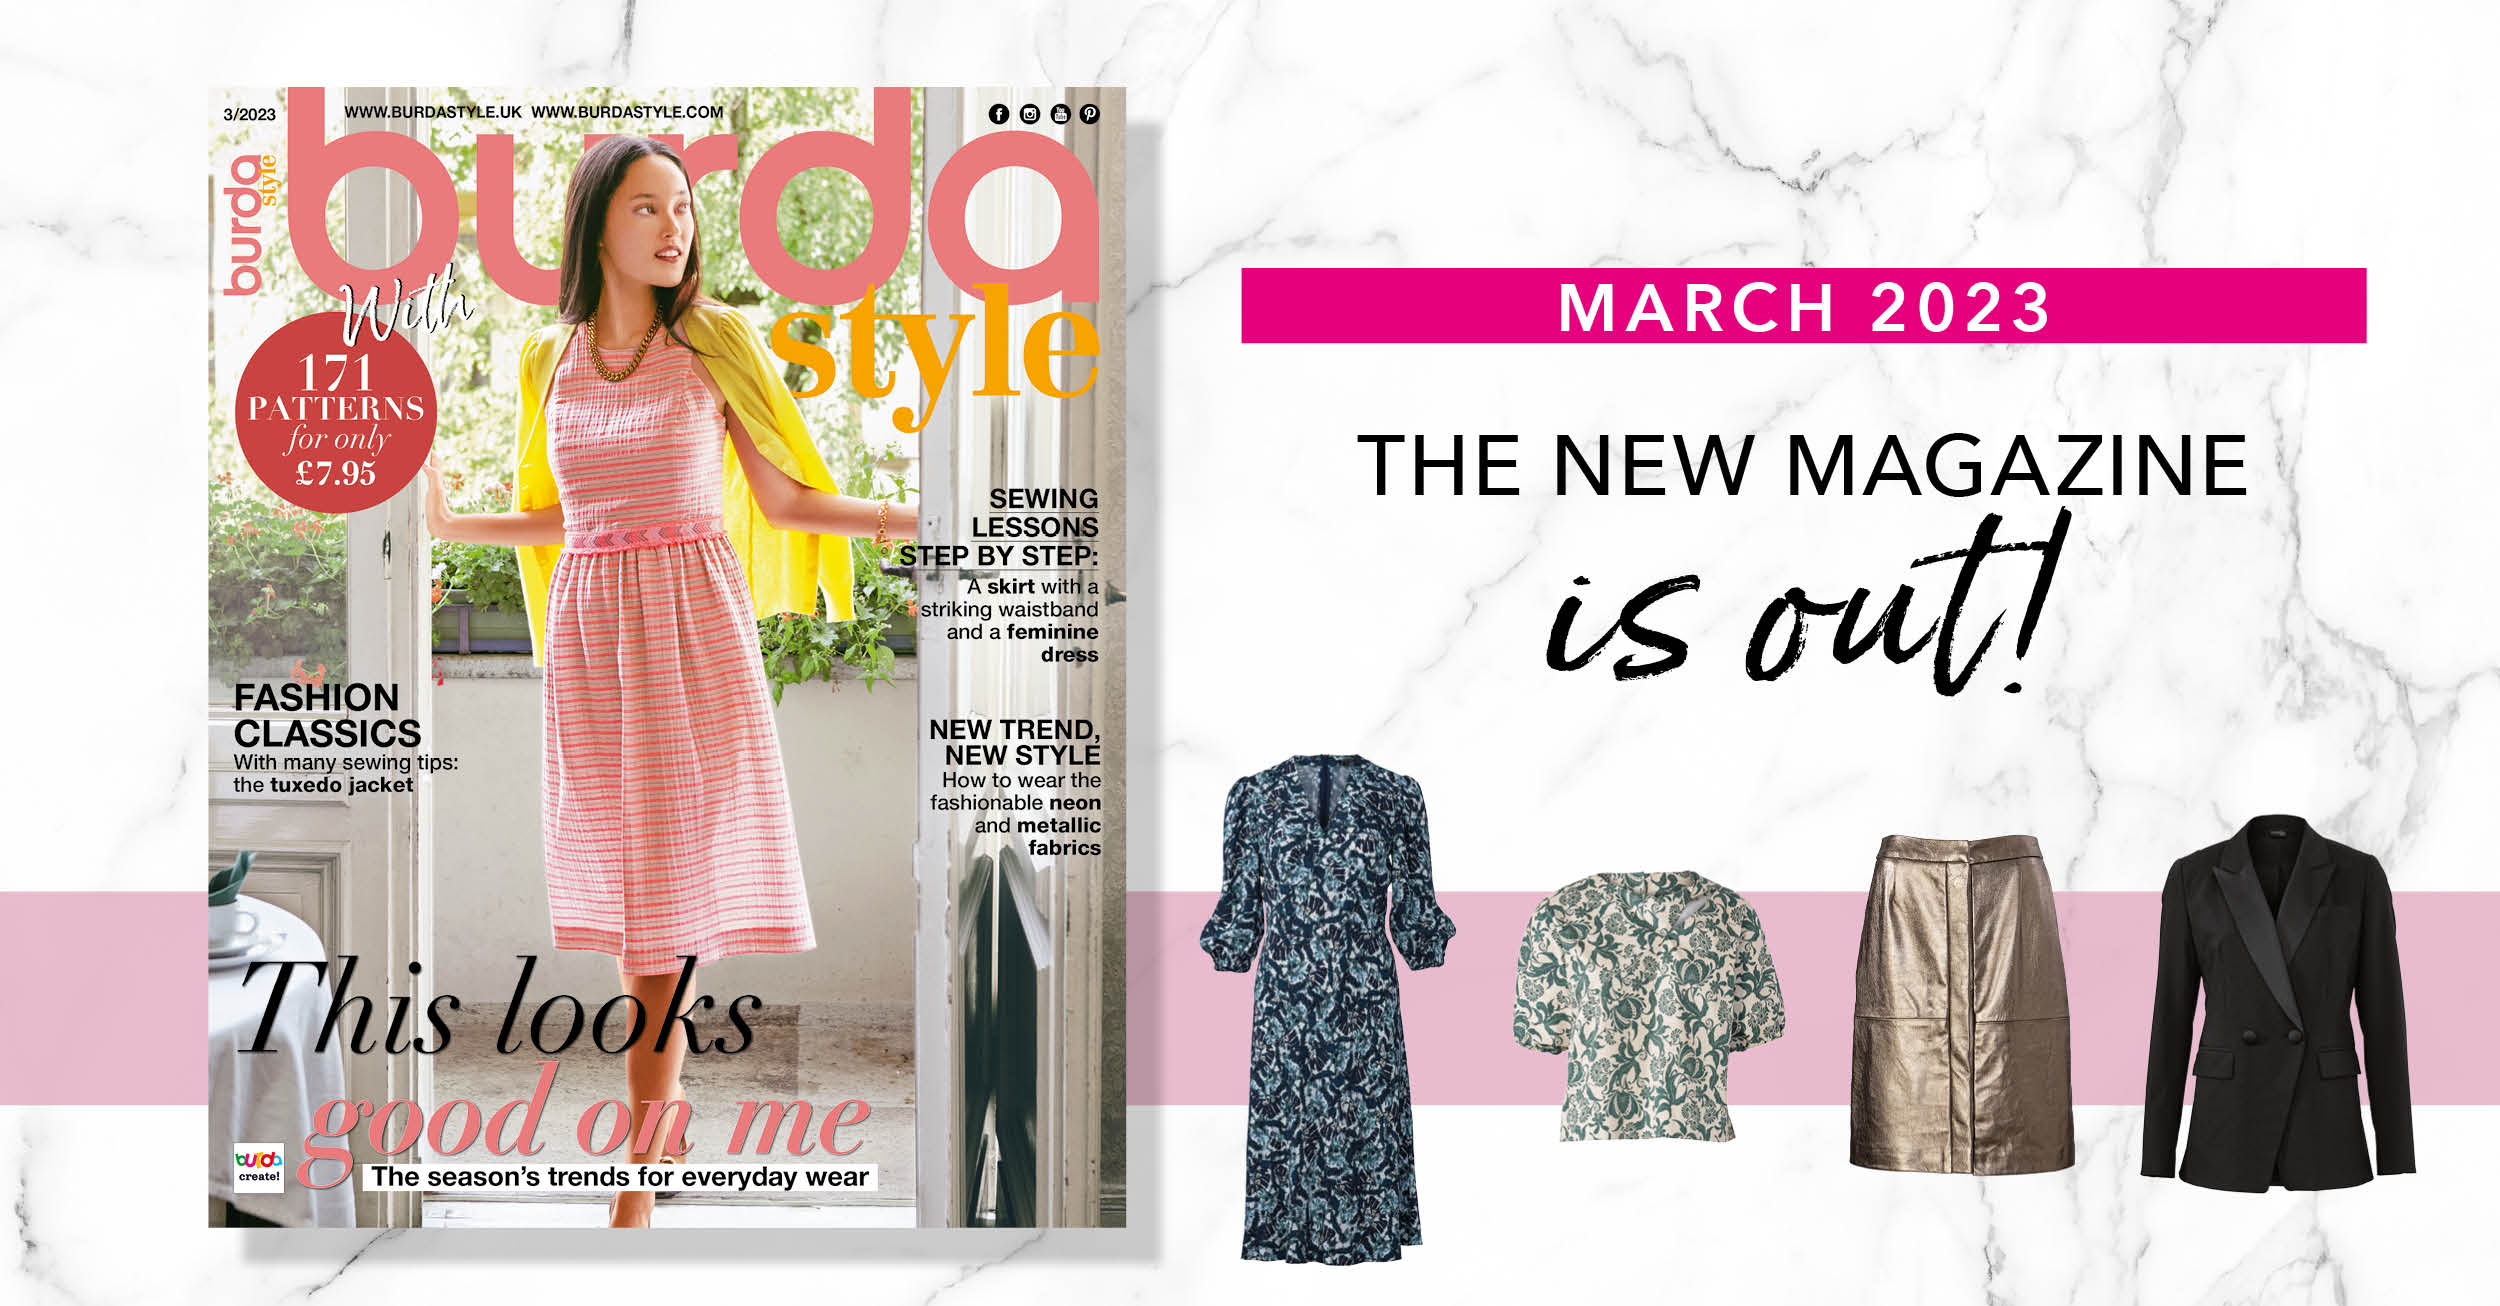 March 2023: The New Issue of Burda Style!